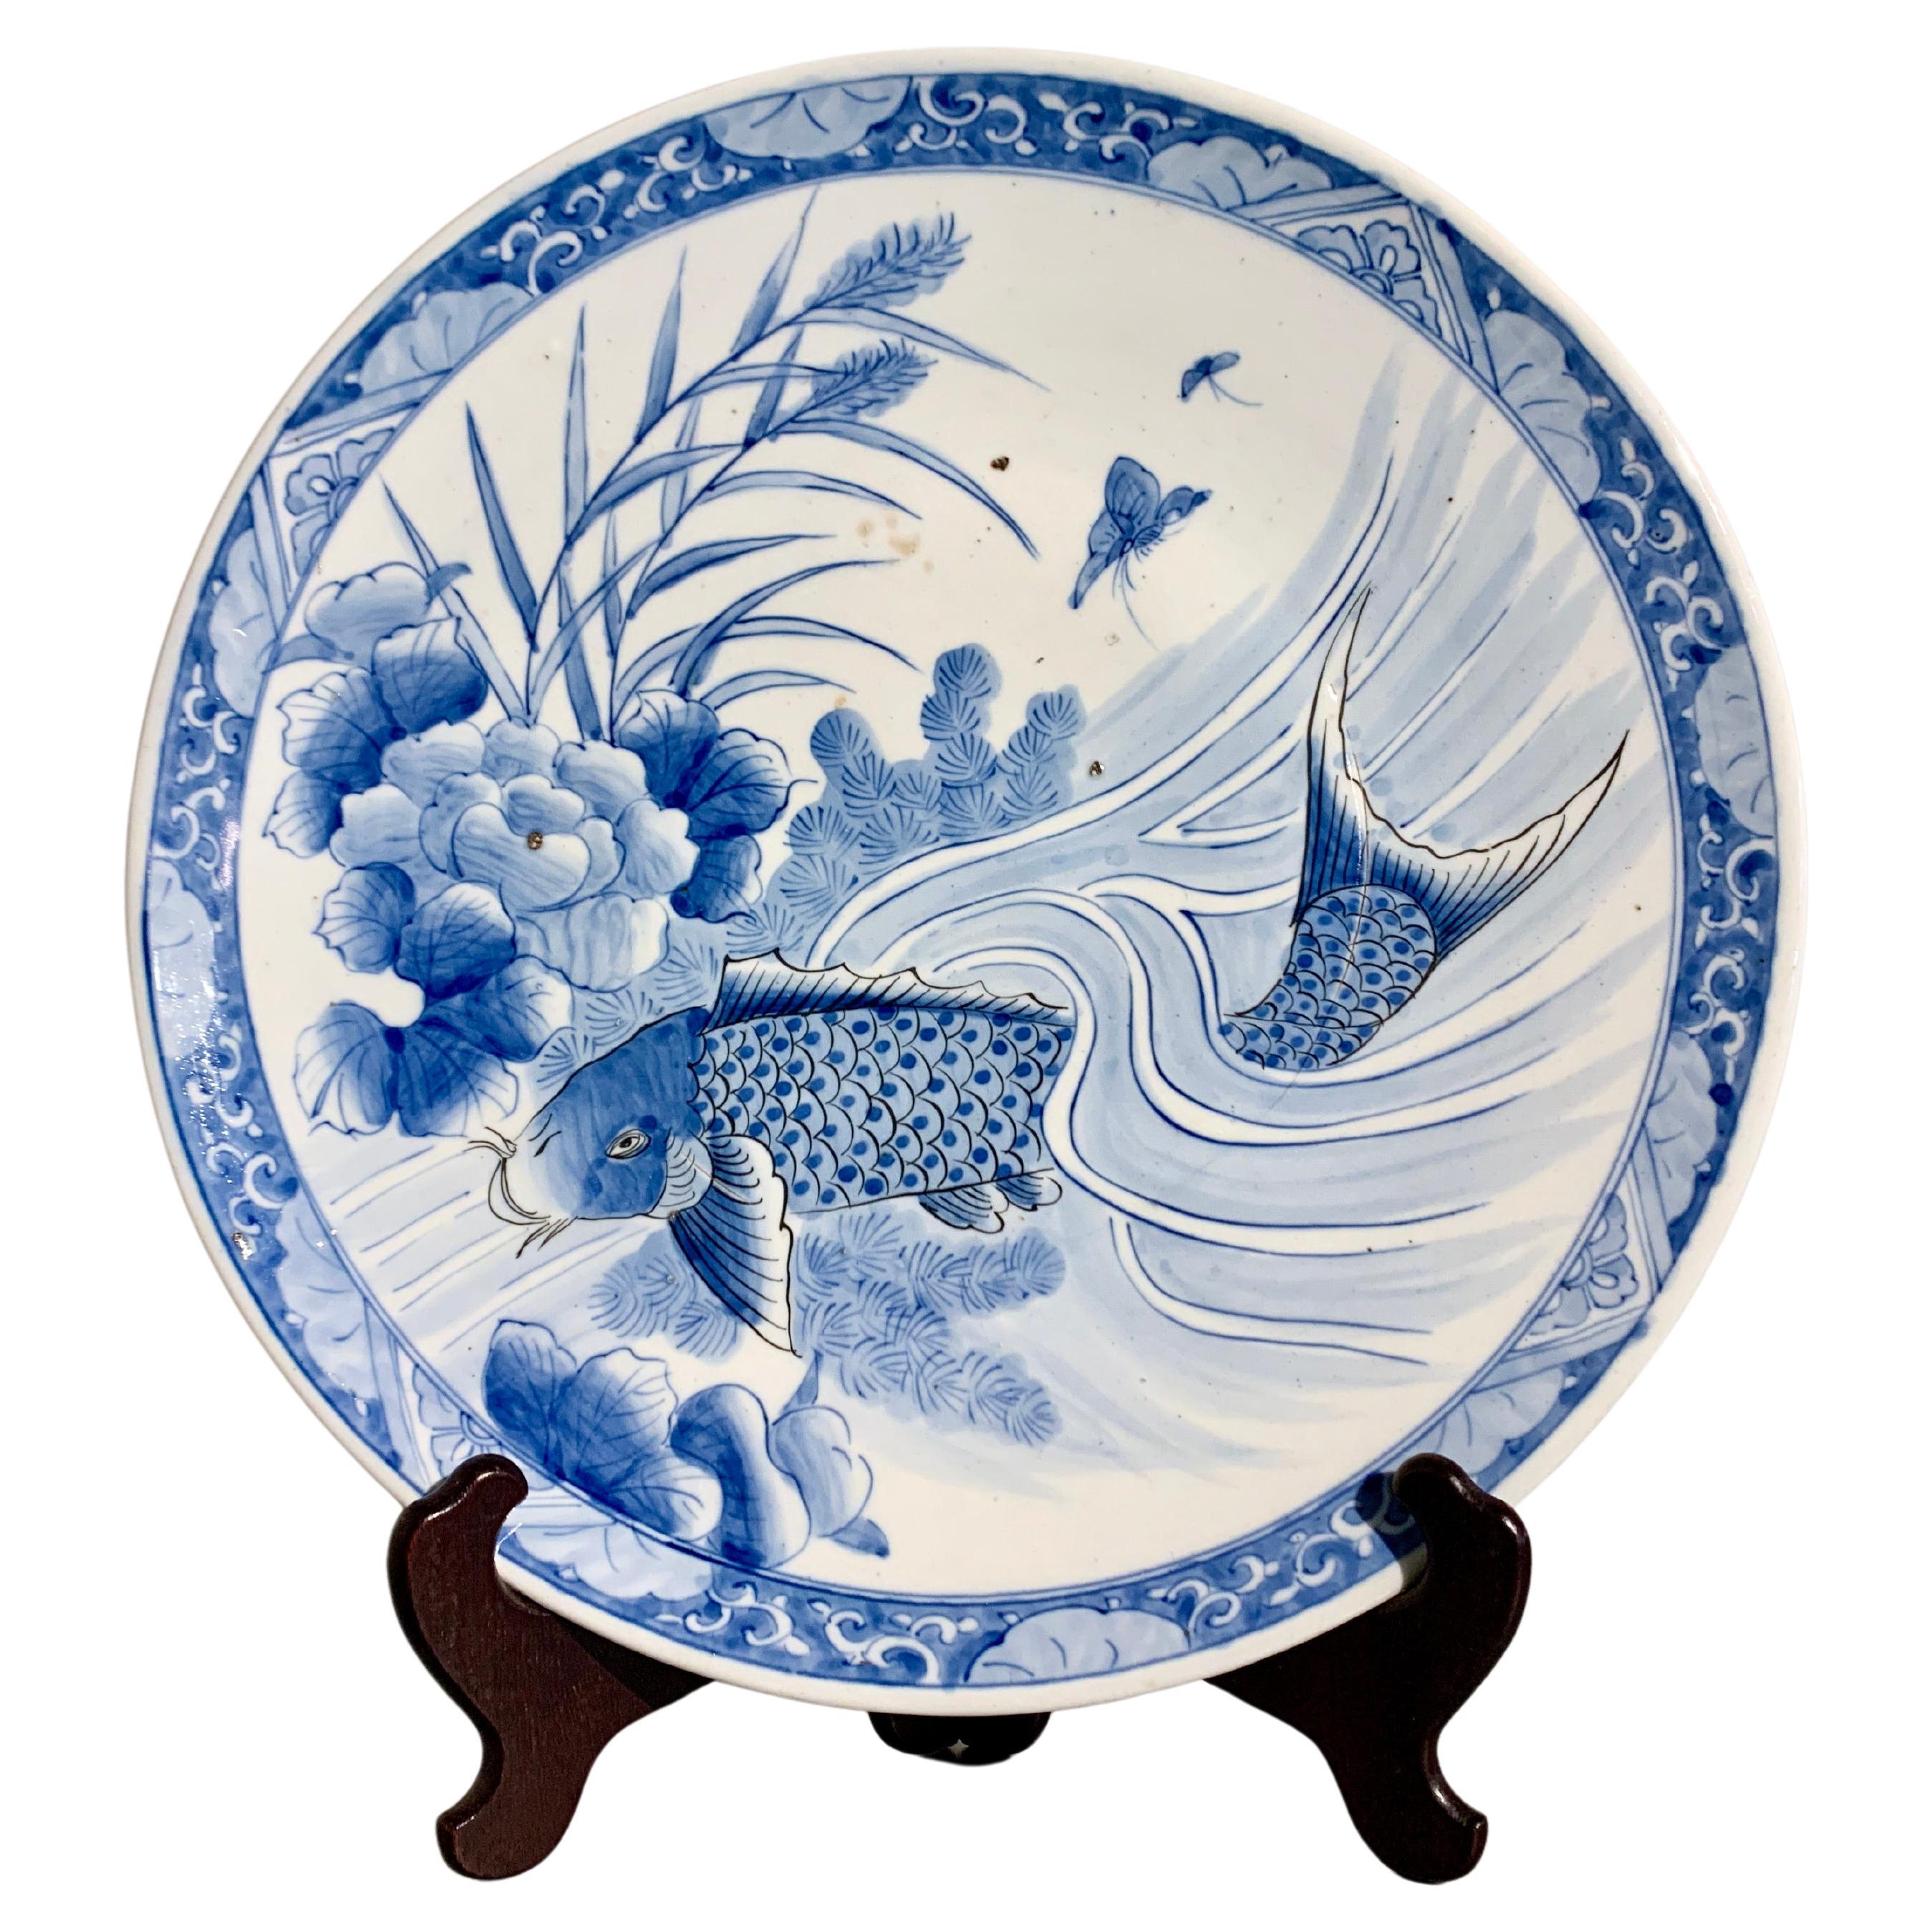 Large Japanese Blue and White Arita Porcelain Charger, Edo Period, 19th C, Japan For Sale